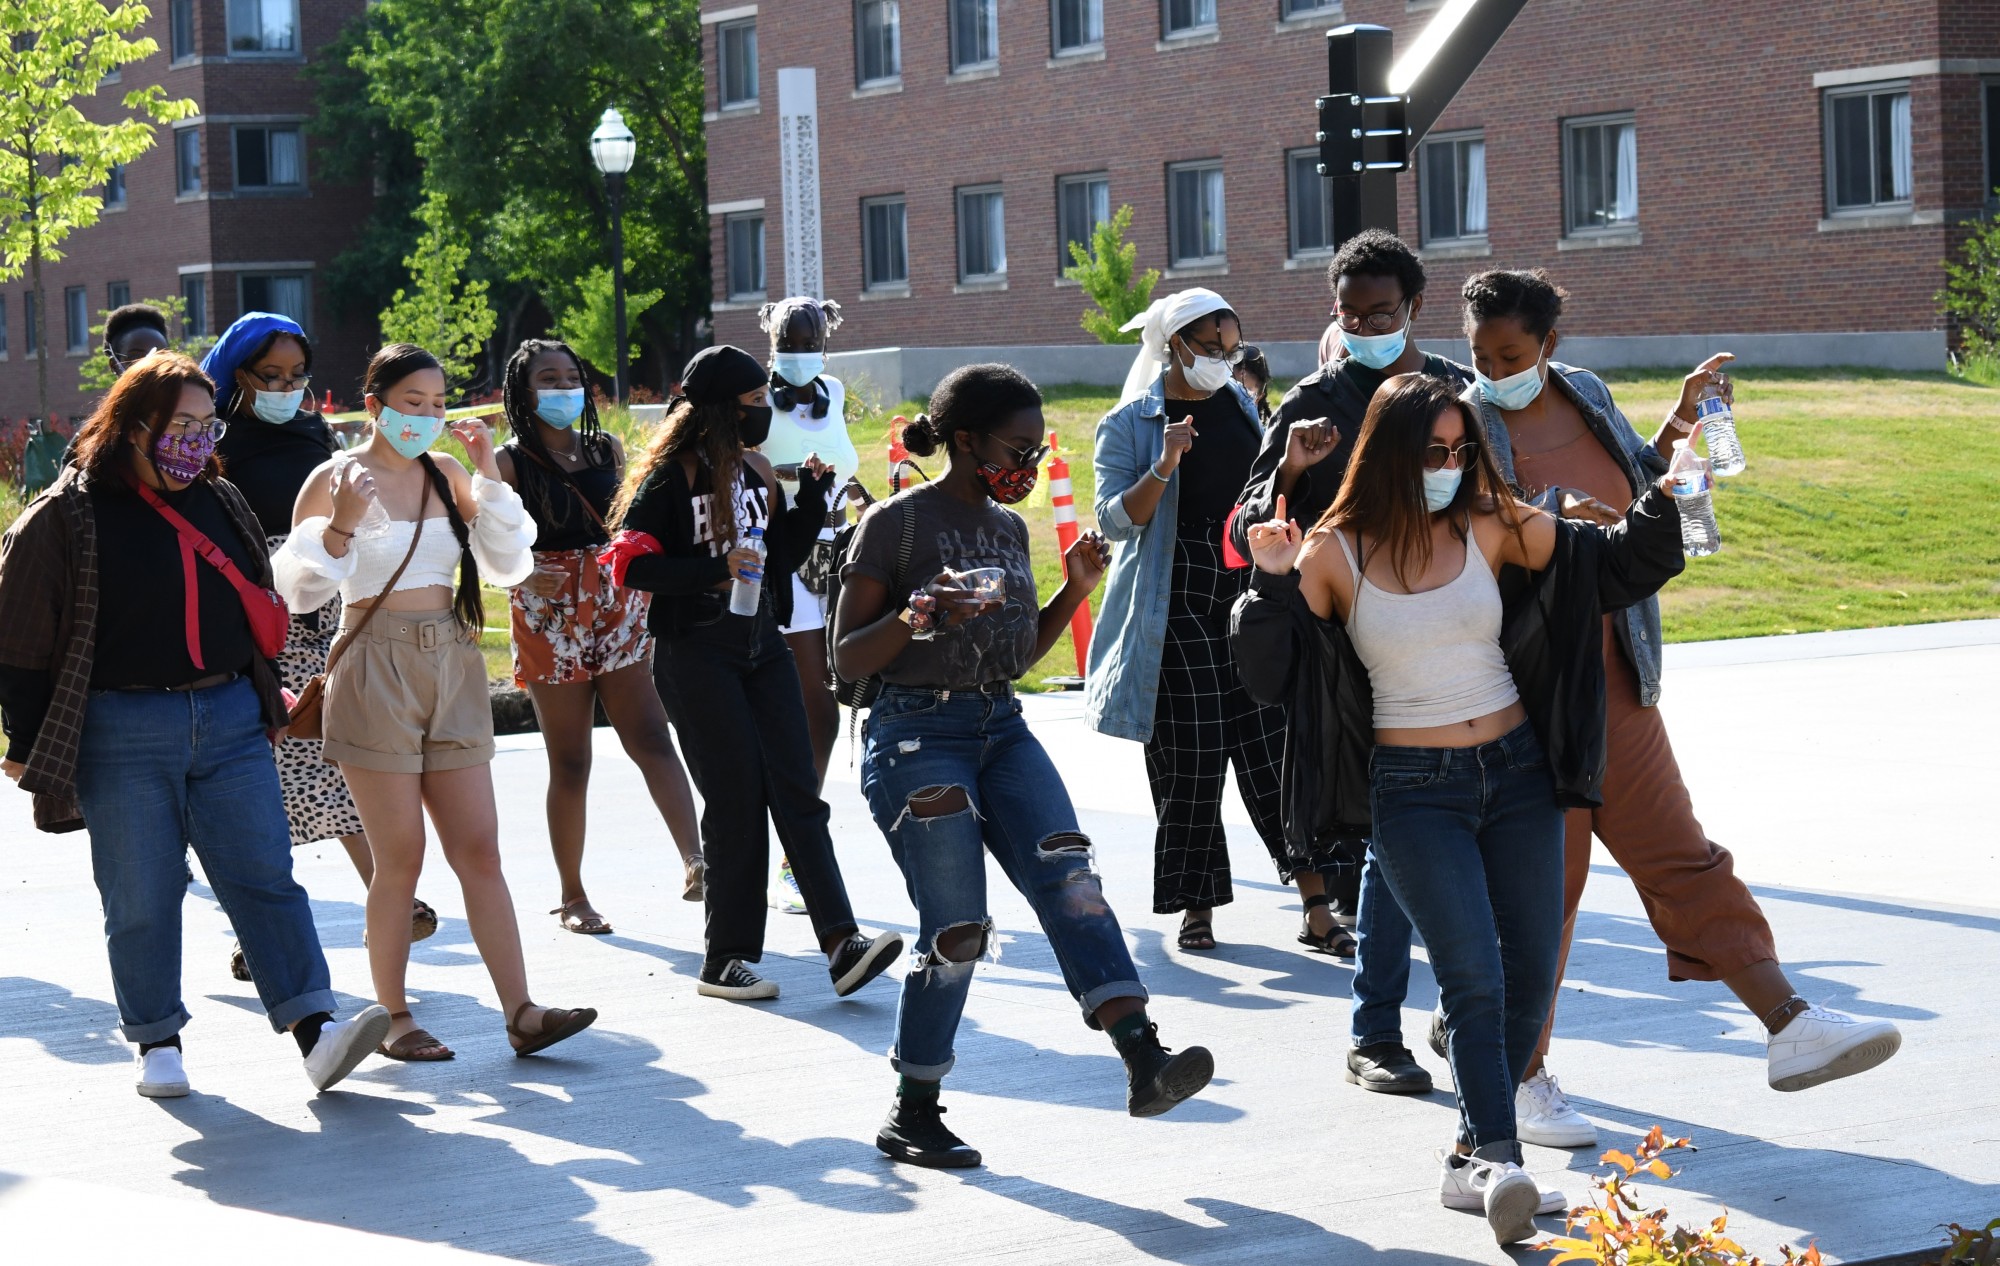 Students celebrate Juneteenth with a dance competition, a cookout, and speeches in the Super block on Saturday, June 20. The celebration was organized by the Black Student Union. (Emily Urfer / Minnesota Daily)